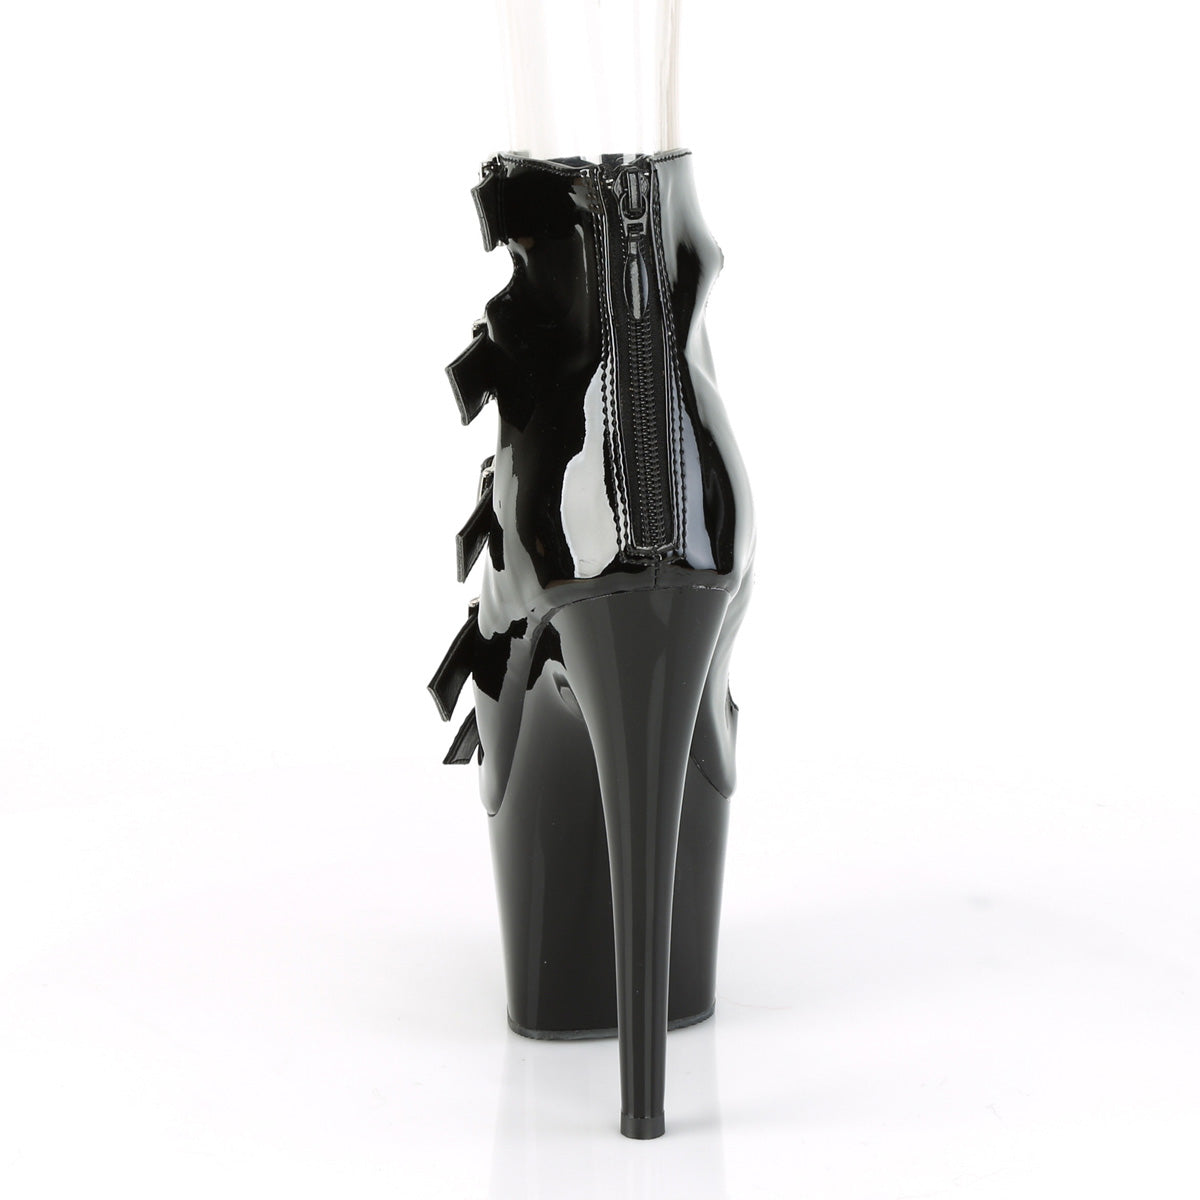 ADORE-700-33 Pleaser Pole Dancing Shoes Ankle Boots Pleasers - Sexy Shoes Fetish Footwear